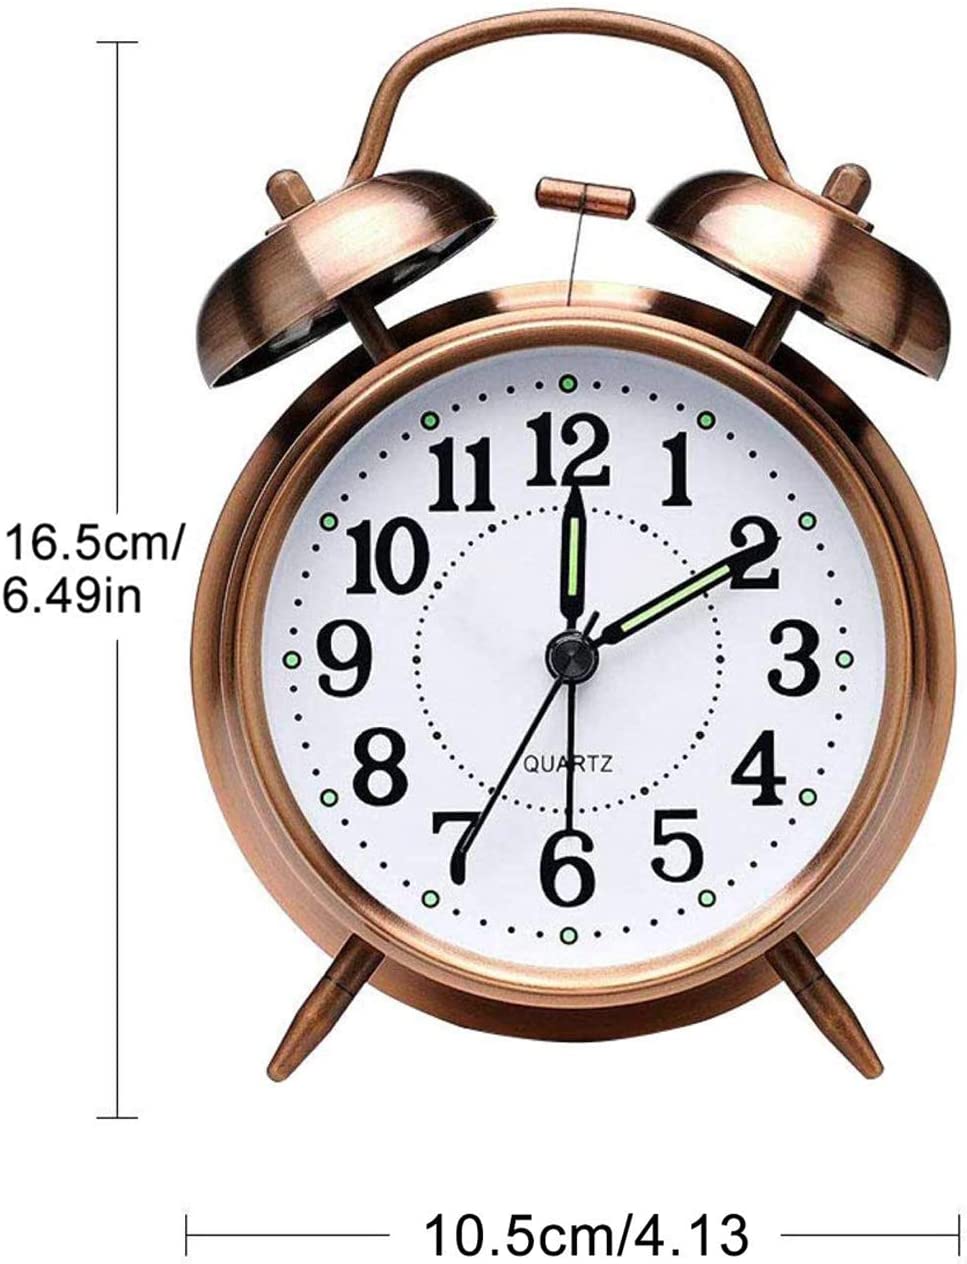 Retro Brown Analogue Quartz Alarm Clock - Old-Fashioned Bedside Twin Bell Non-Ticking Loud Battery-Operated w/Night Light for Bedroom 6